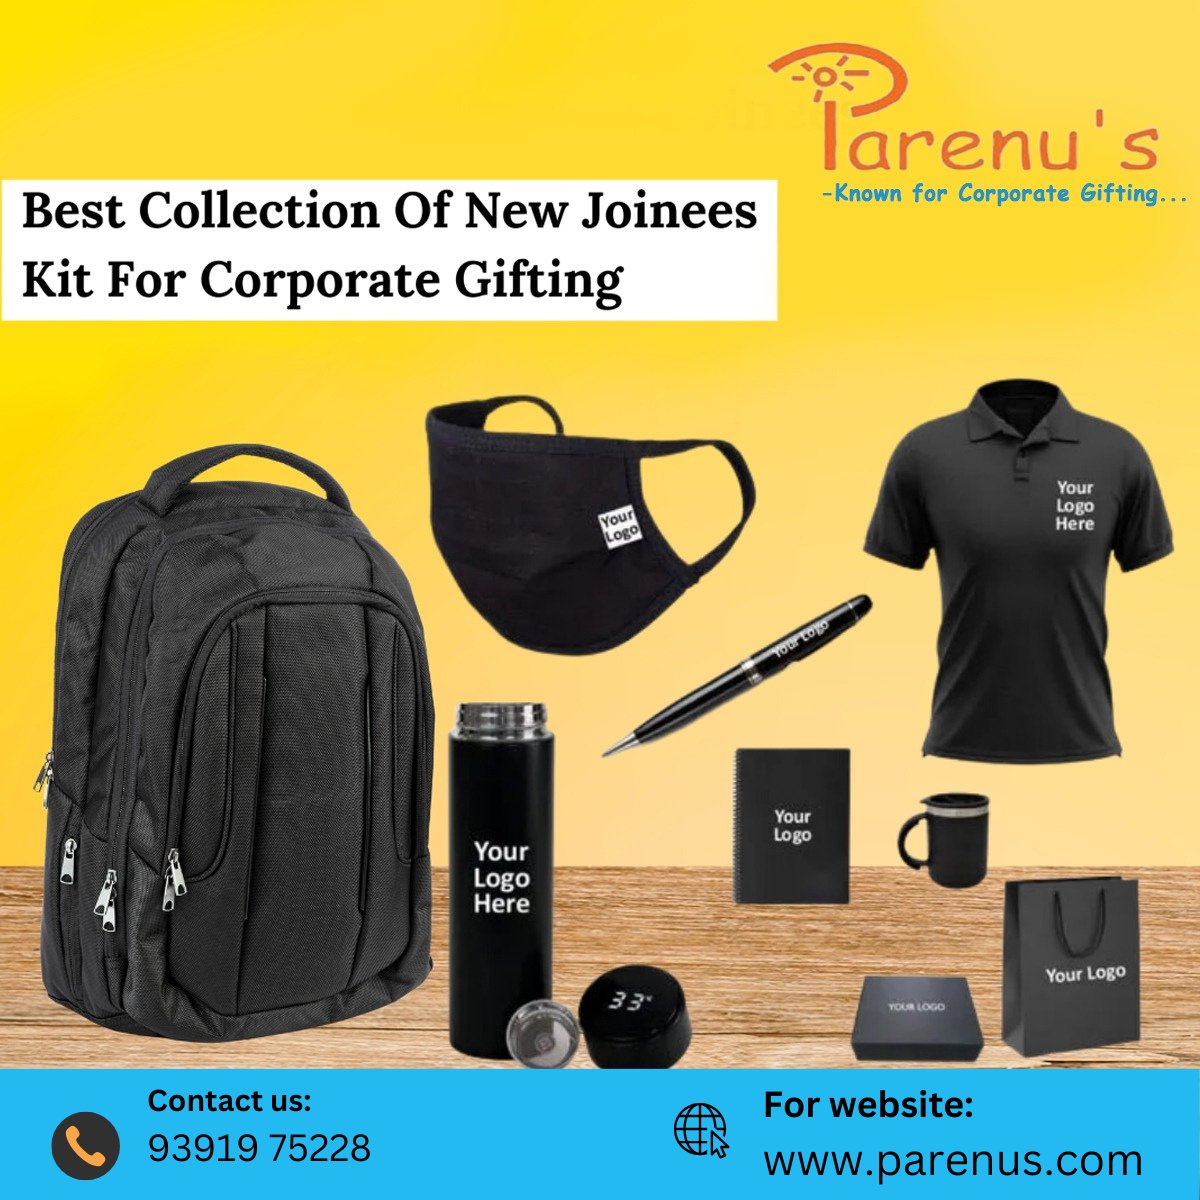 Welcome Kit For New Employees — Get on-brand, exciting & functional on-boarding kit for employees and clients.

Call Now : 9391975228

#parenus #corporategift #gifting #employeegifts #joineekit #welcomekit #corporatelife #newjoinee #fresherjobs #newjob